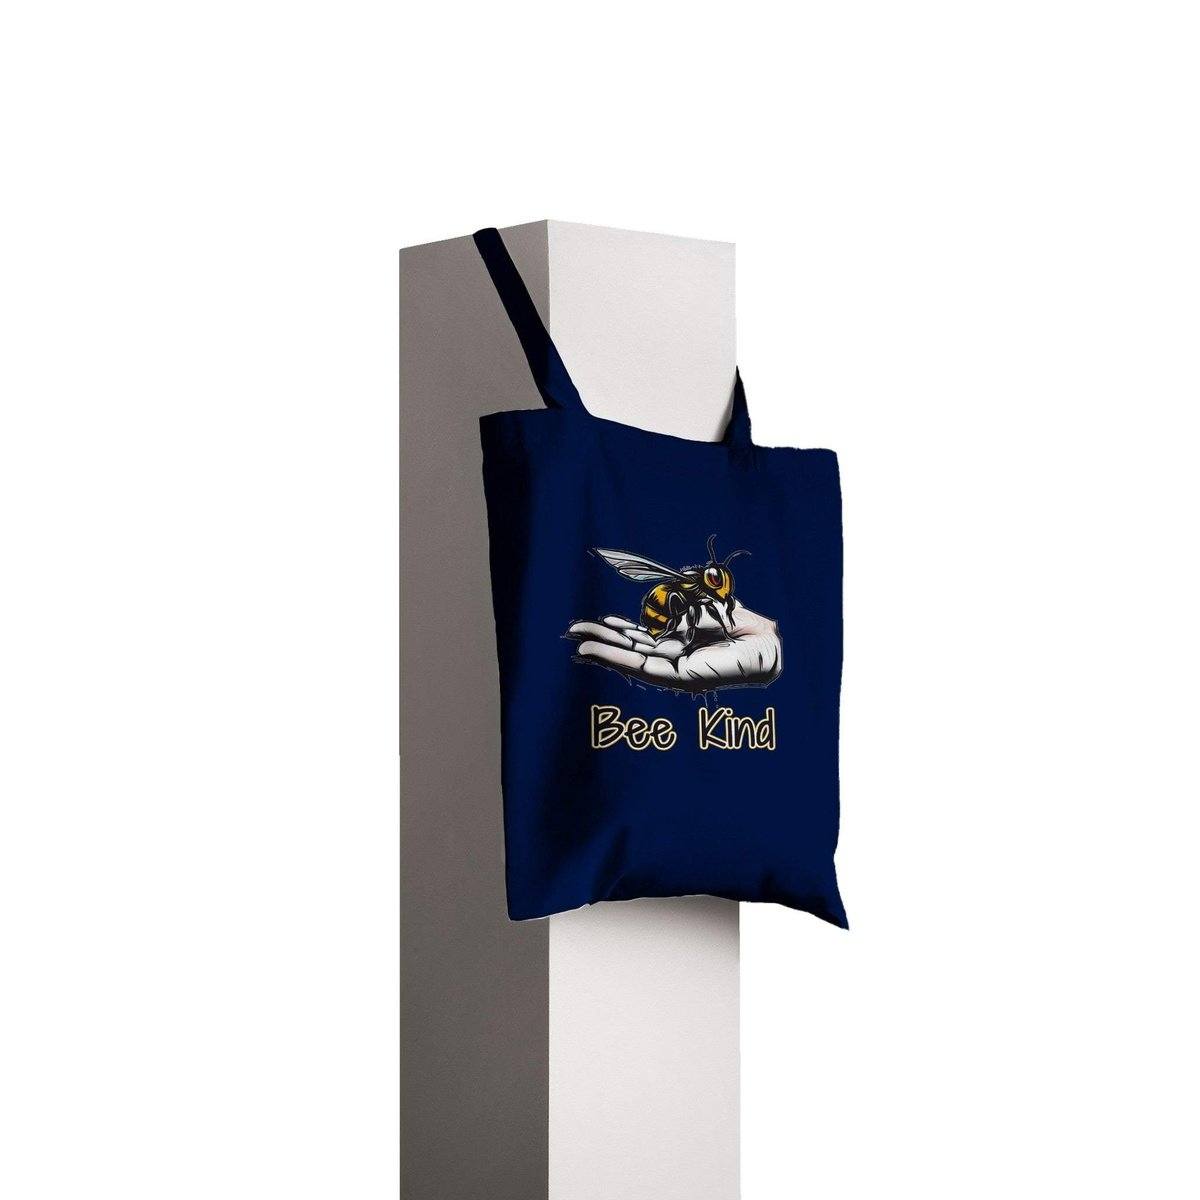 Bee Kind Tote Bag - Bee On Palm - Classic Tote Bag Australia Online Color Navy